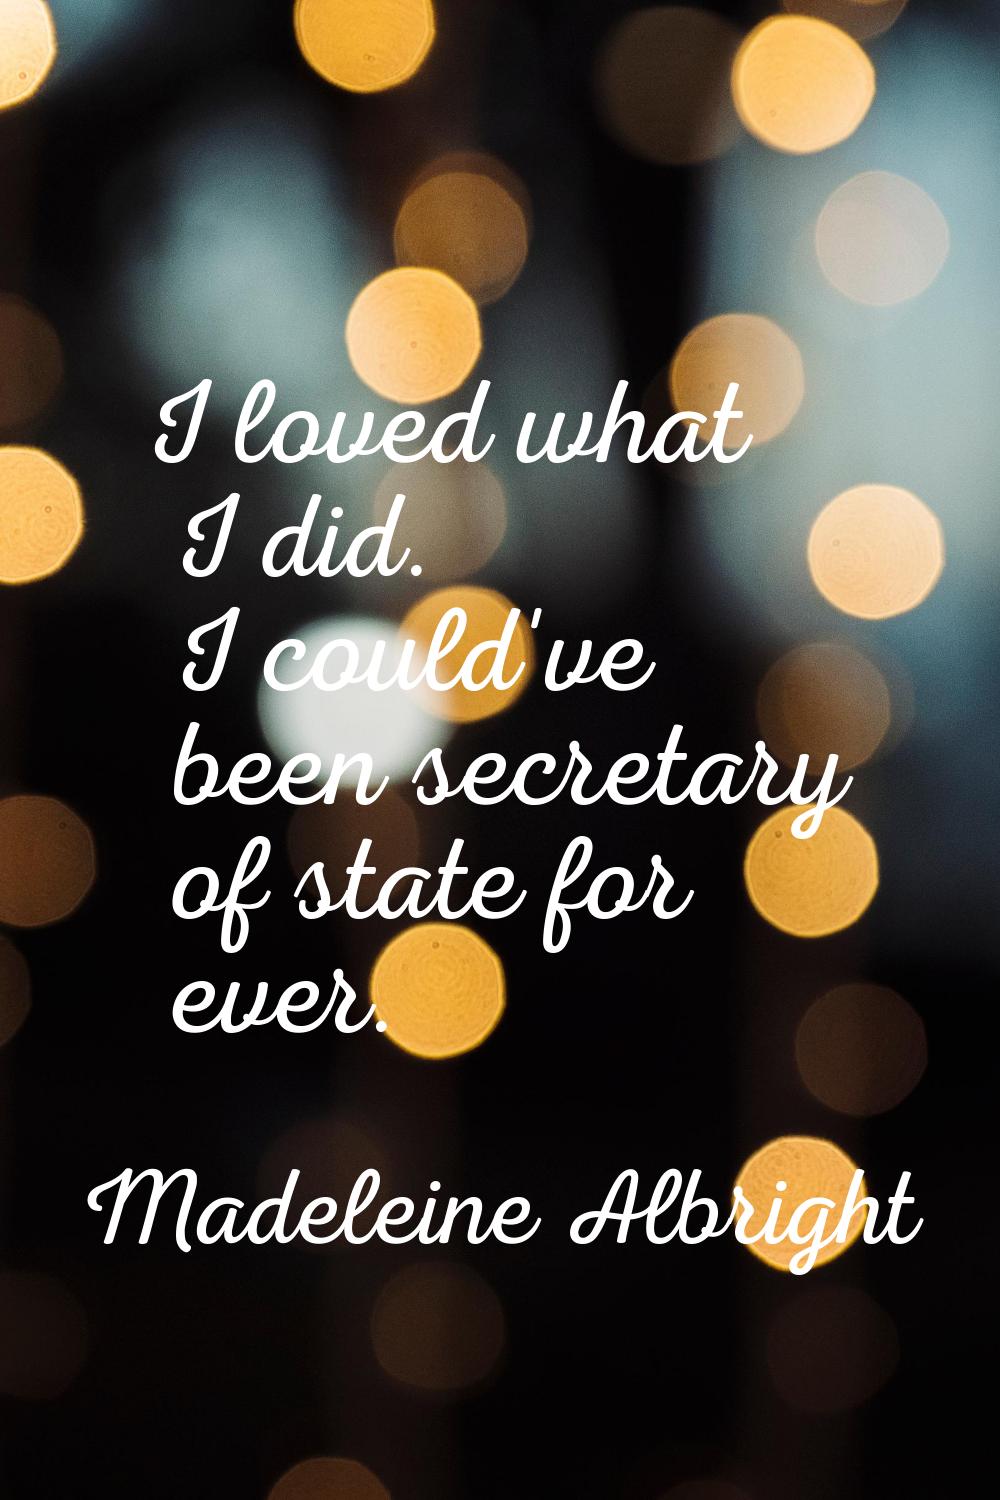 I loved what I did. I could've been secretary of state for ever.